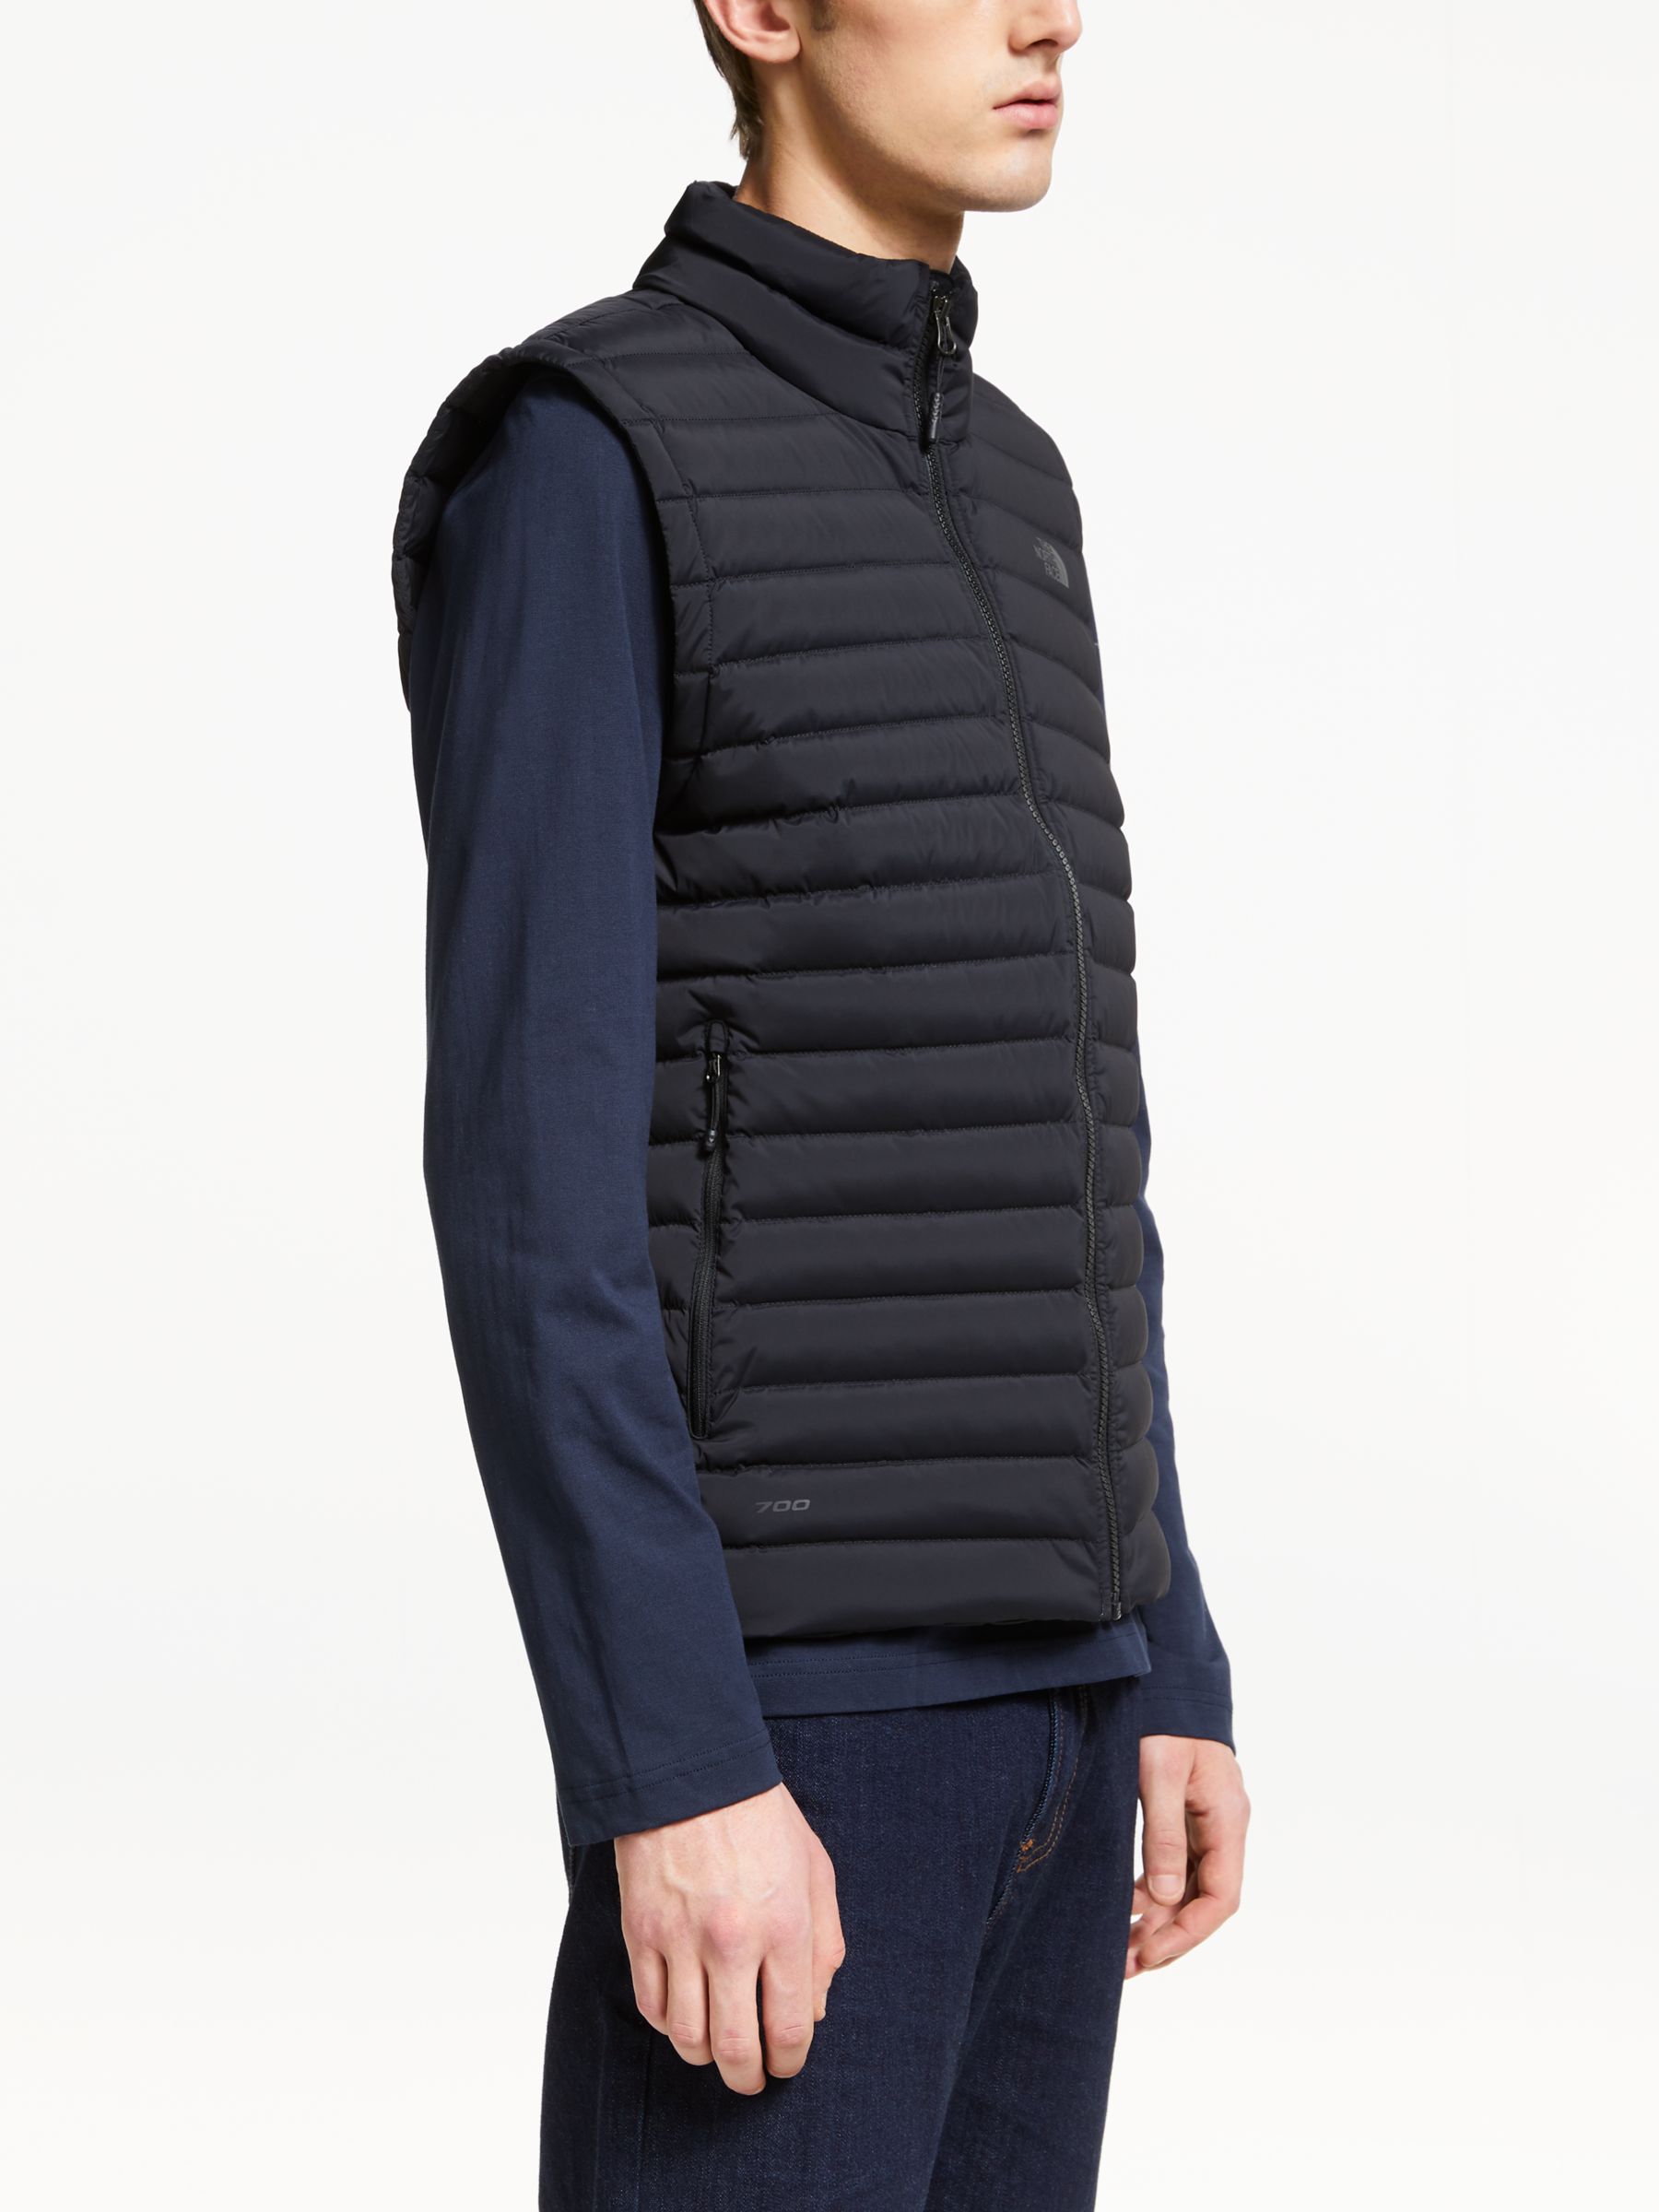 The North Face Stretch Down Vest, Black 